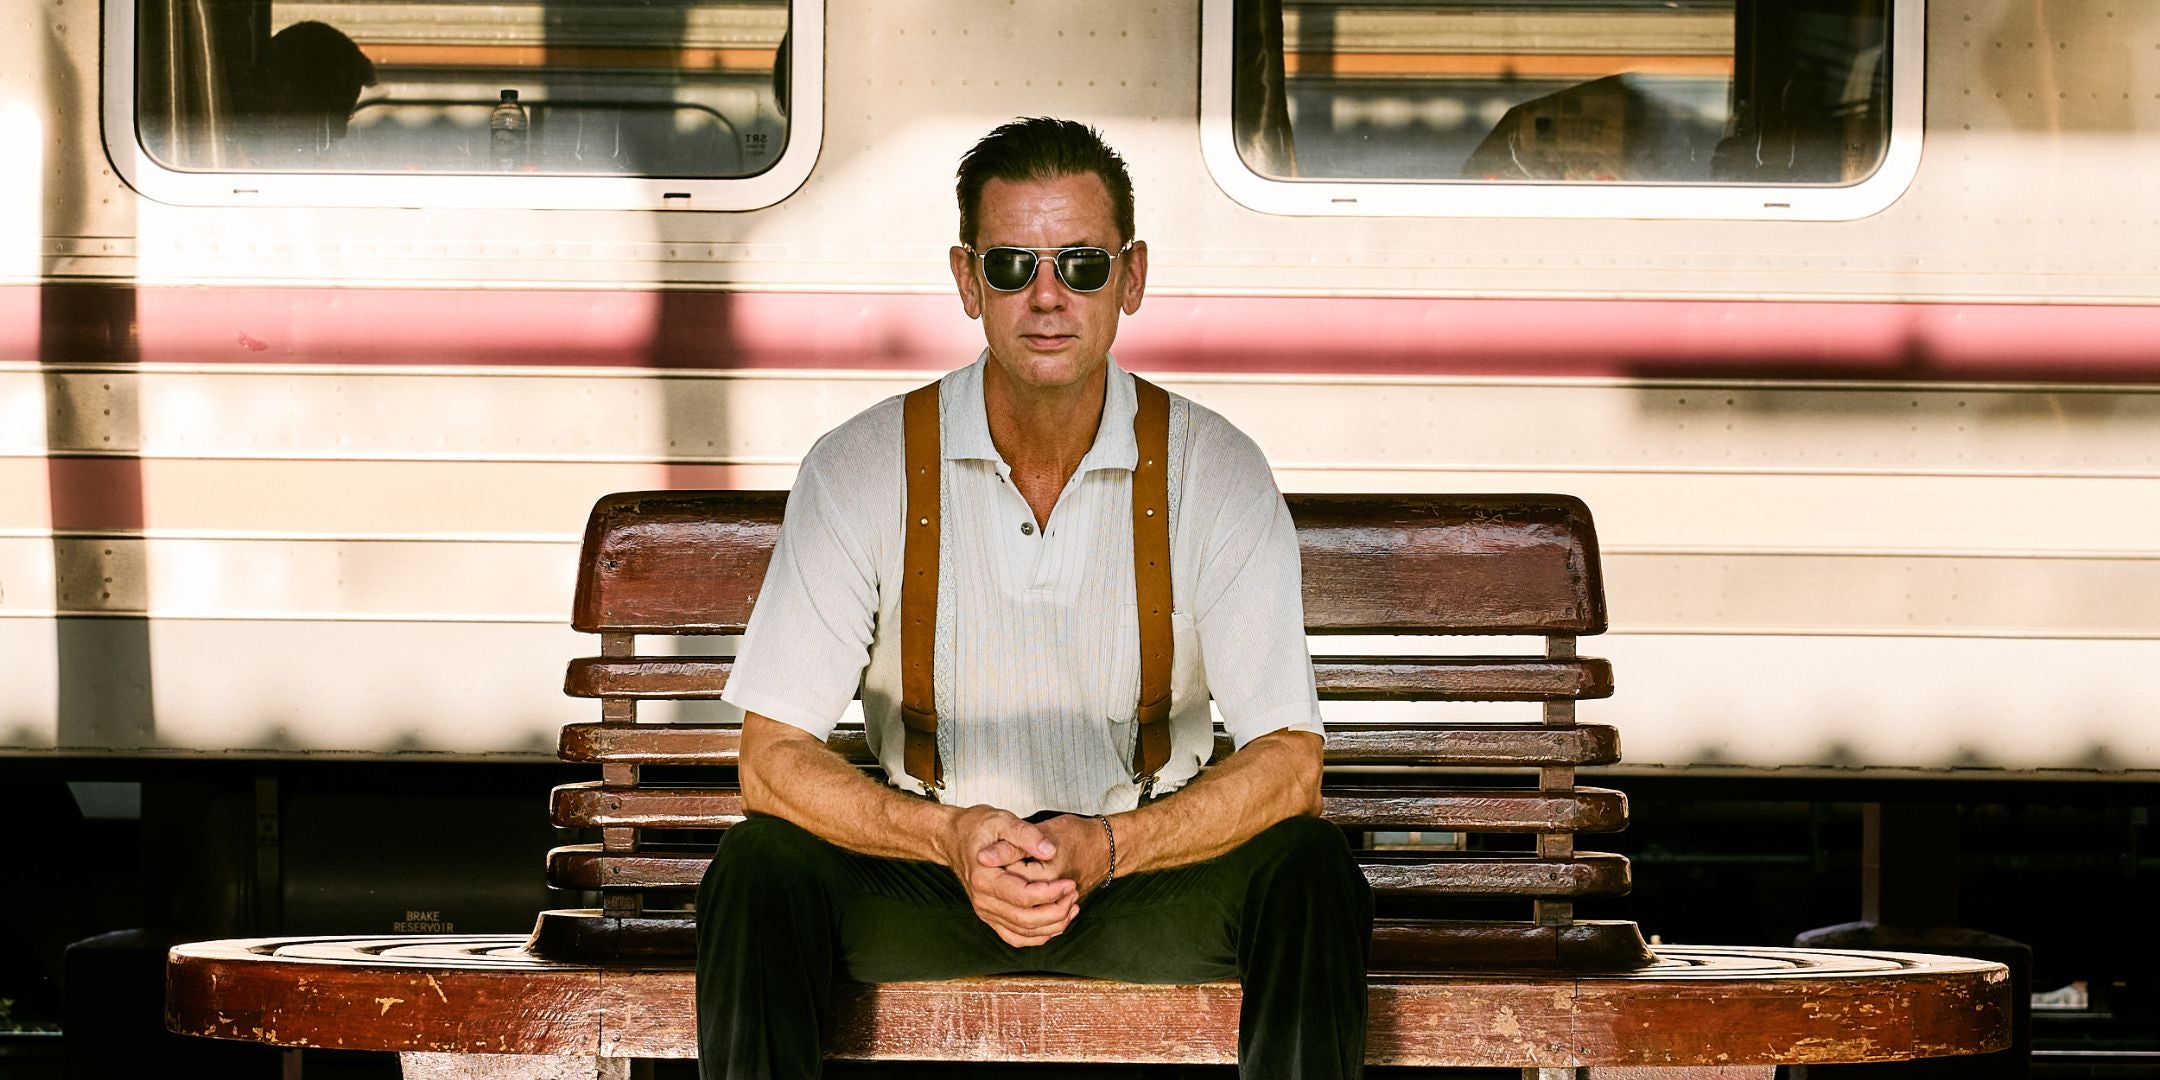 Man Sitting on Train bench wearing sunglasses leather camel colored suspenders and a white tshirt